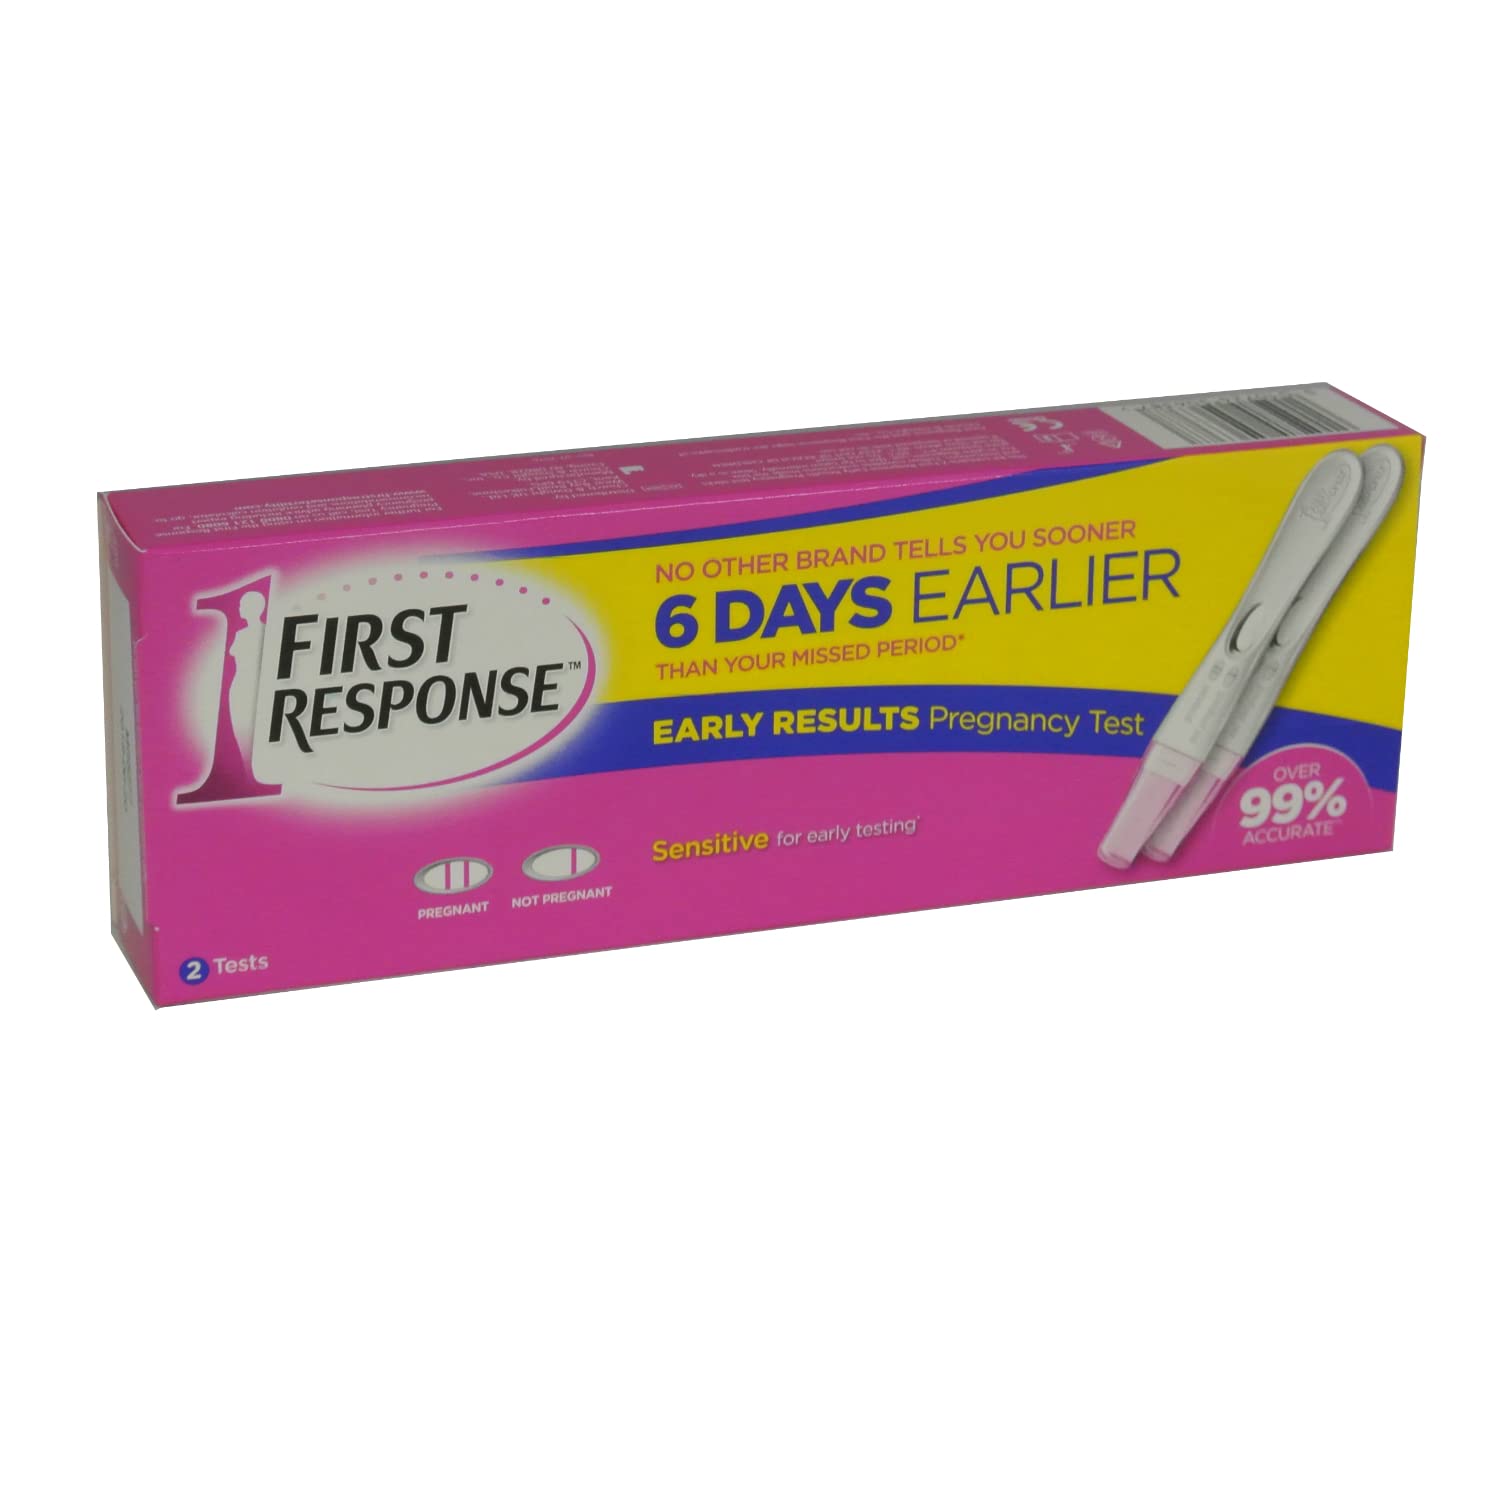 2 x 2 First Response Pregnancy Early Result Test Pack